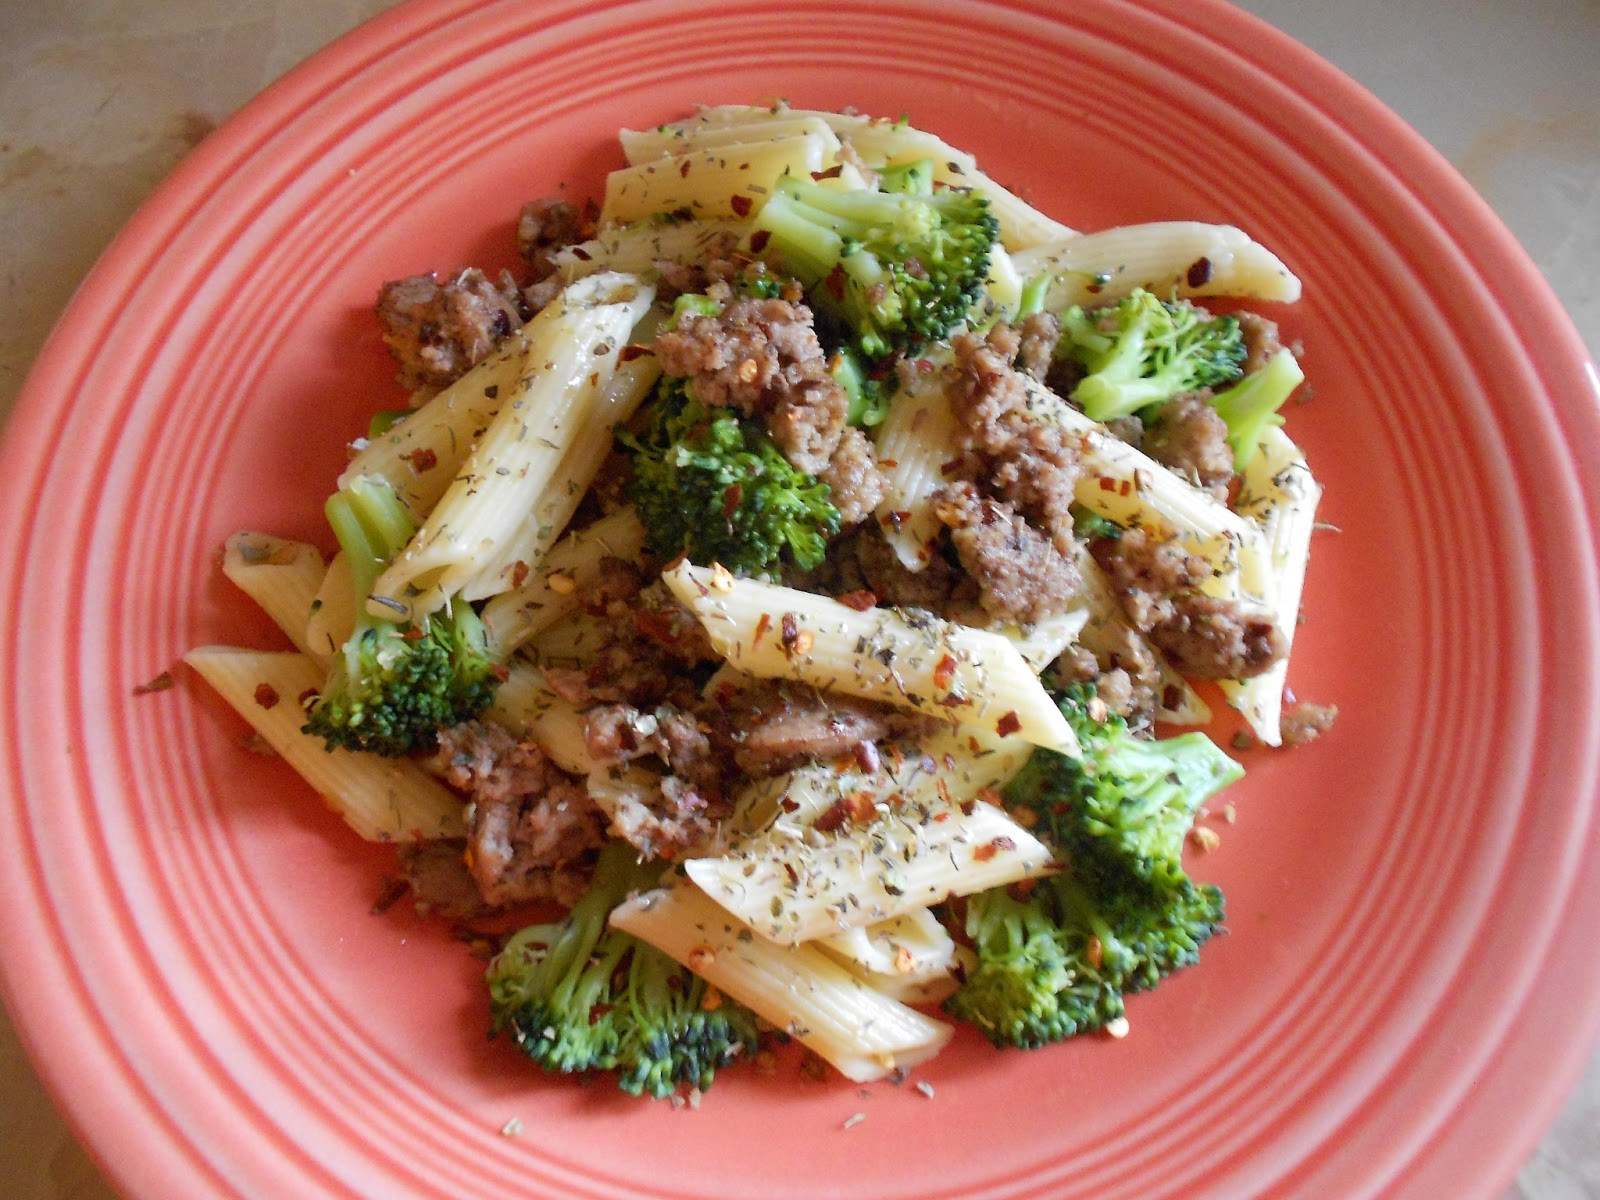 Healthy Dinner With Ground Turkey
 A Healthy Dinner Pasta With Ground Turkey and Broccoli